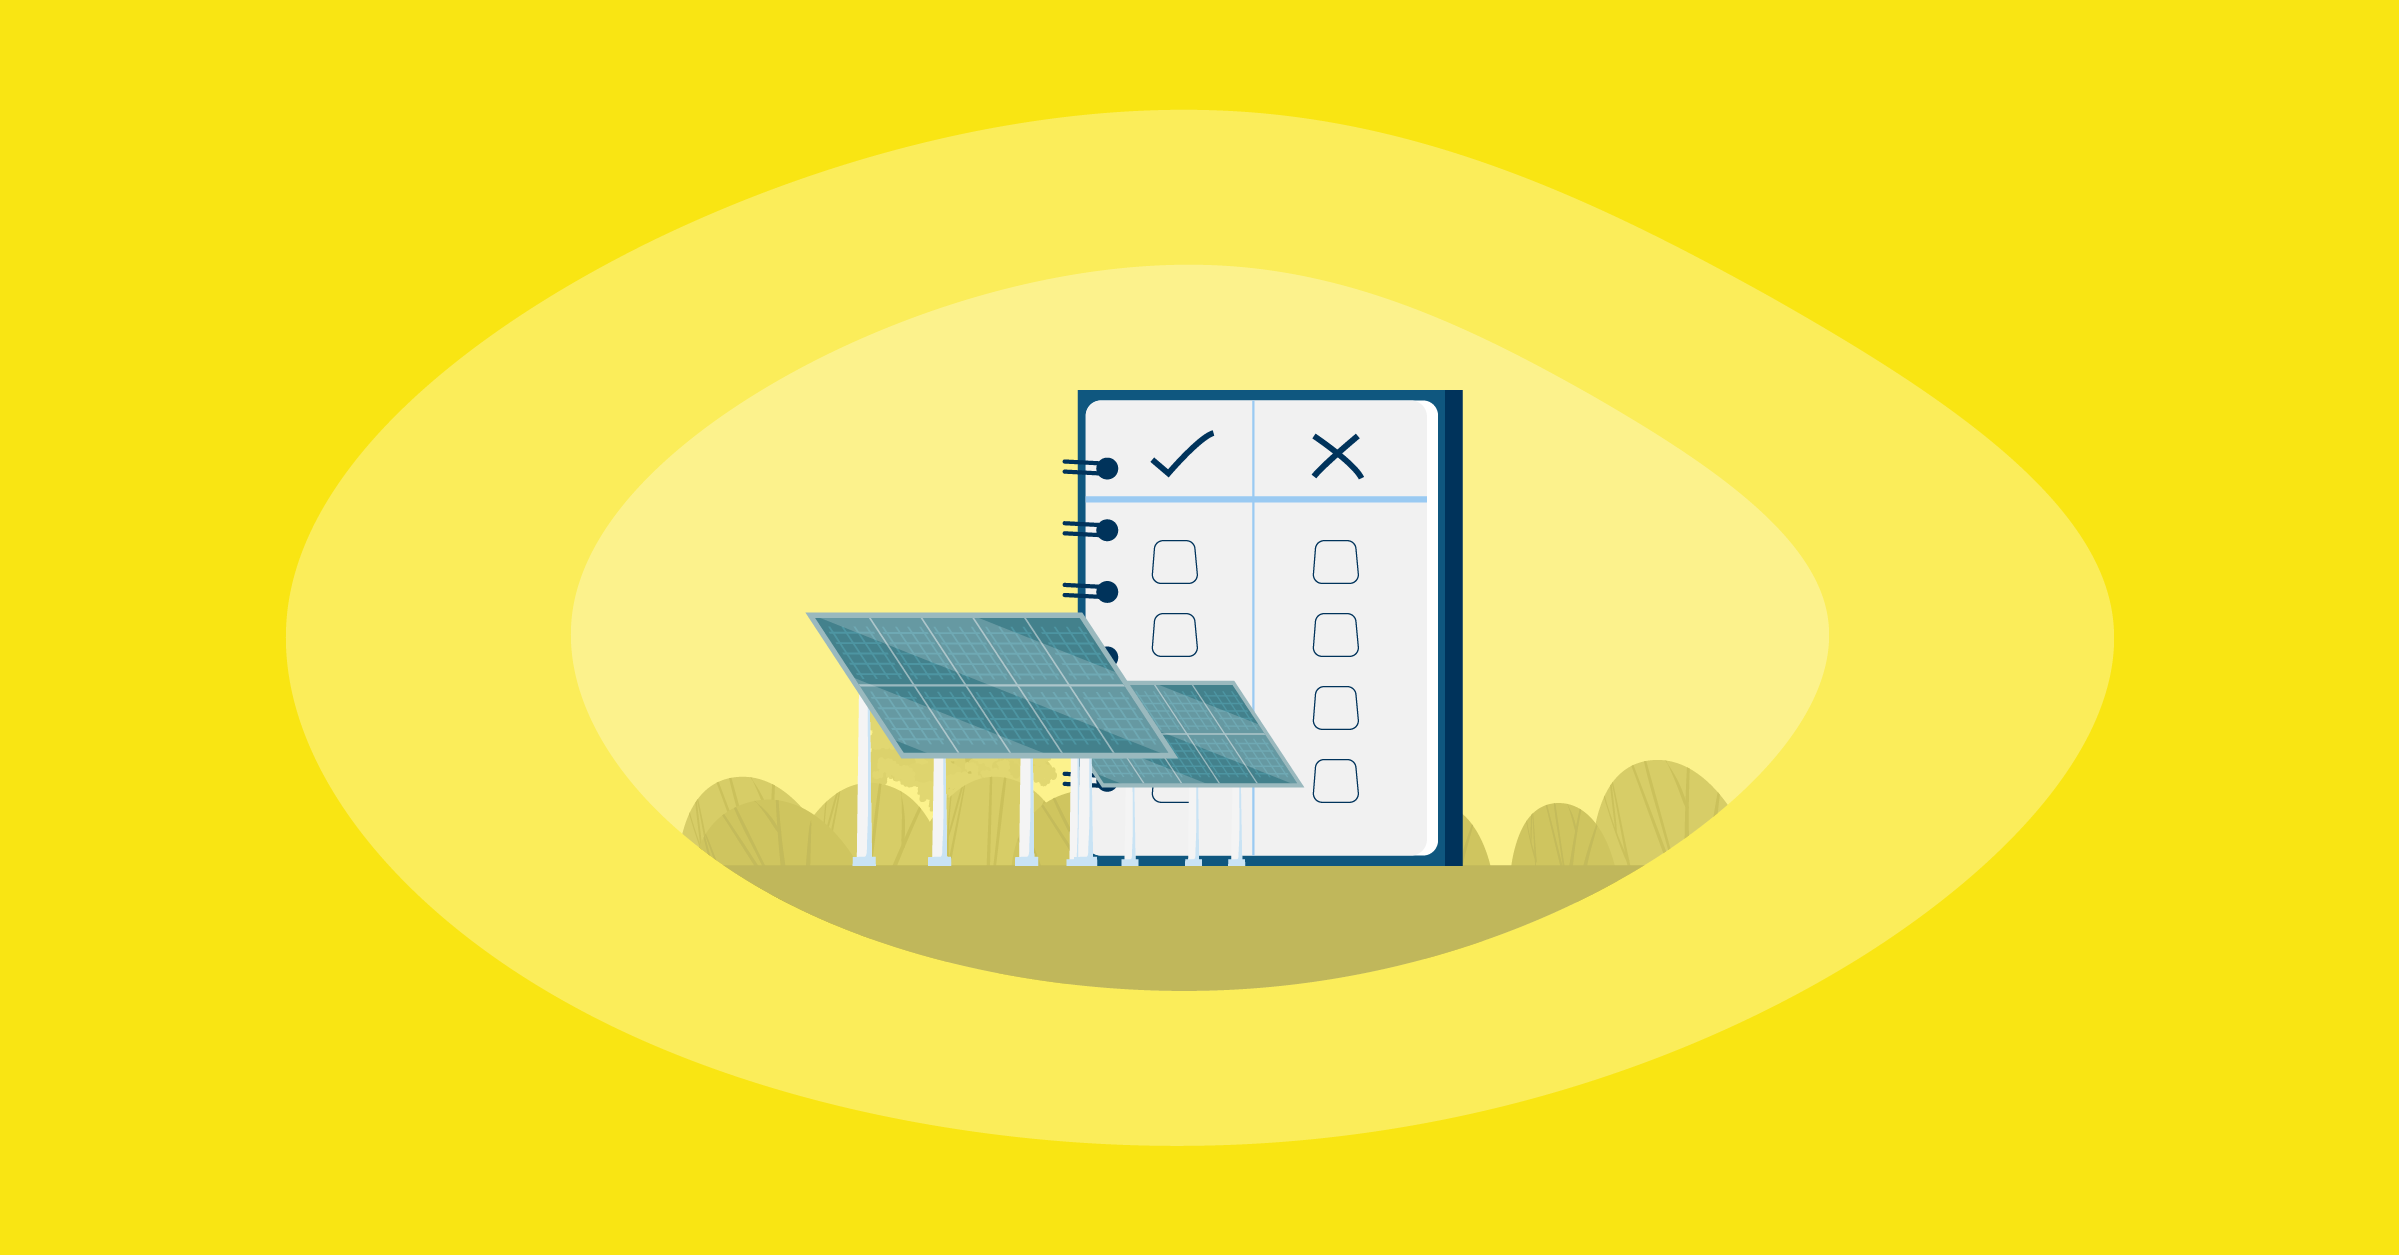 Illustration of the pros and cons of solar energy